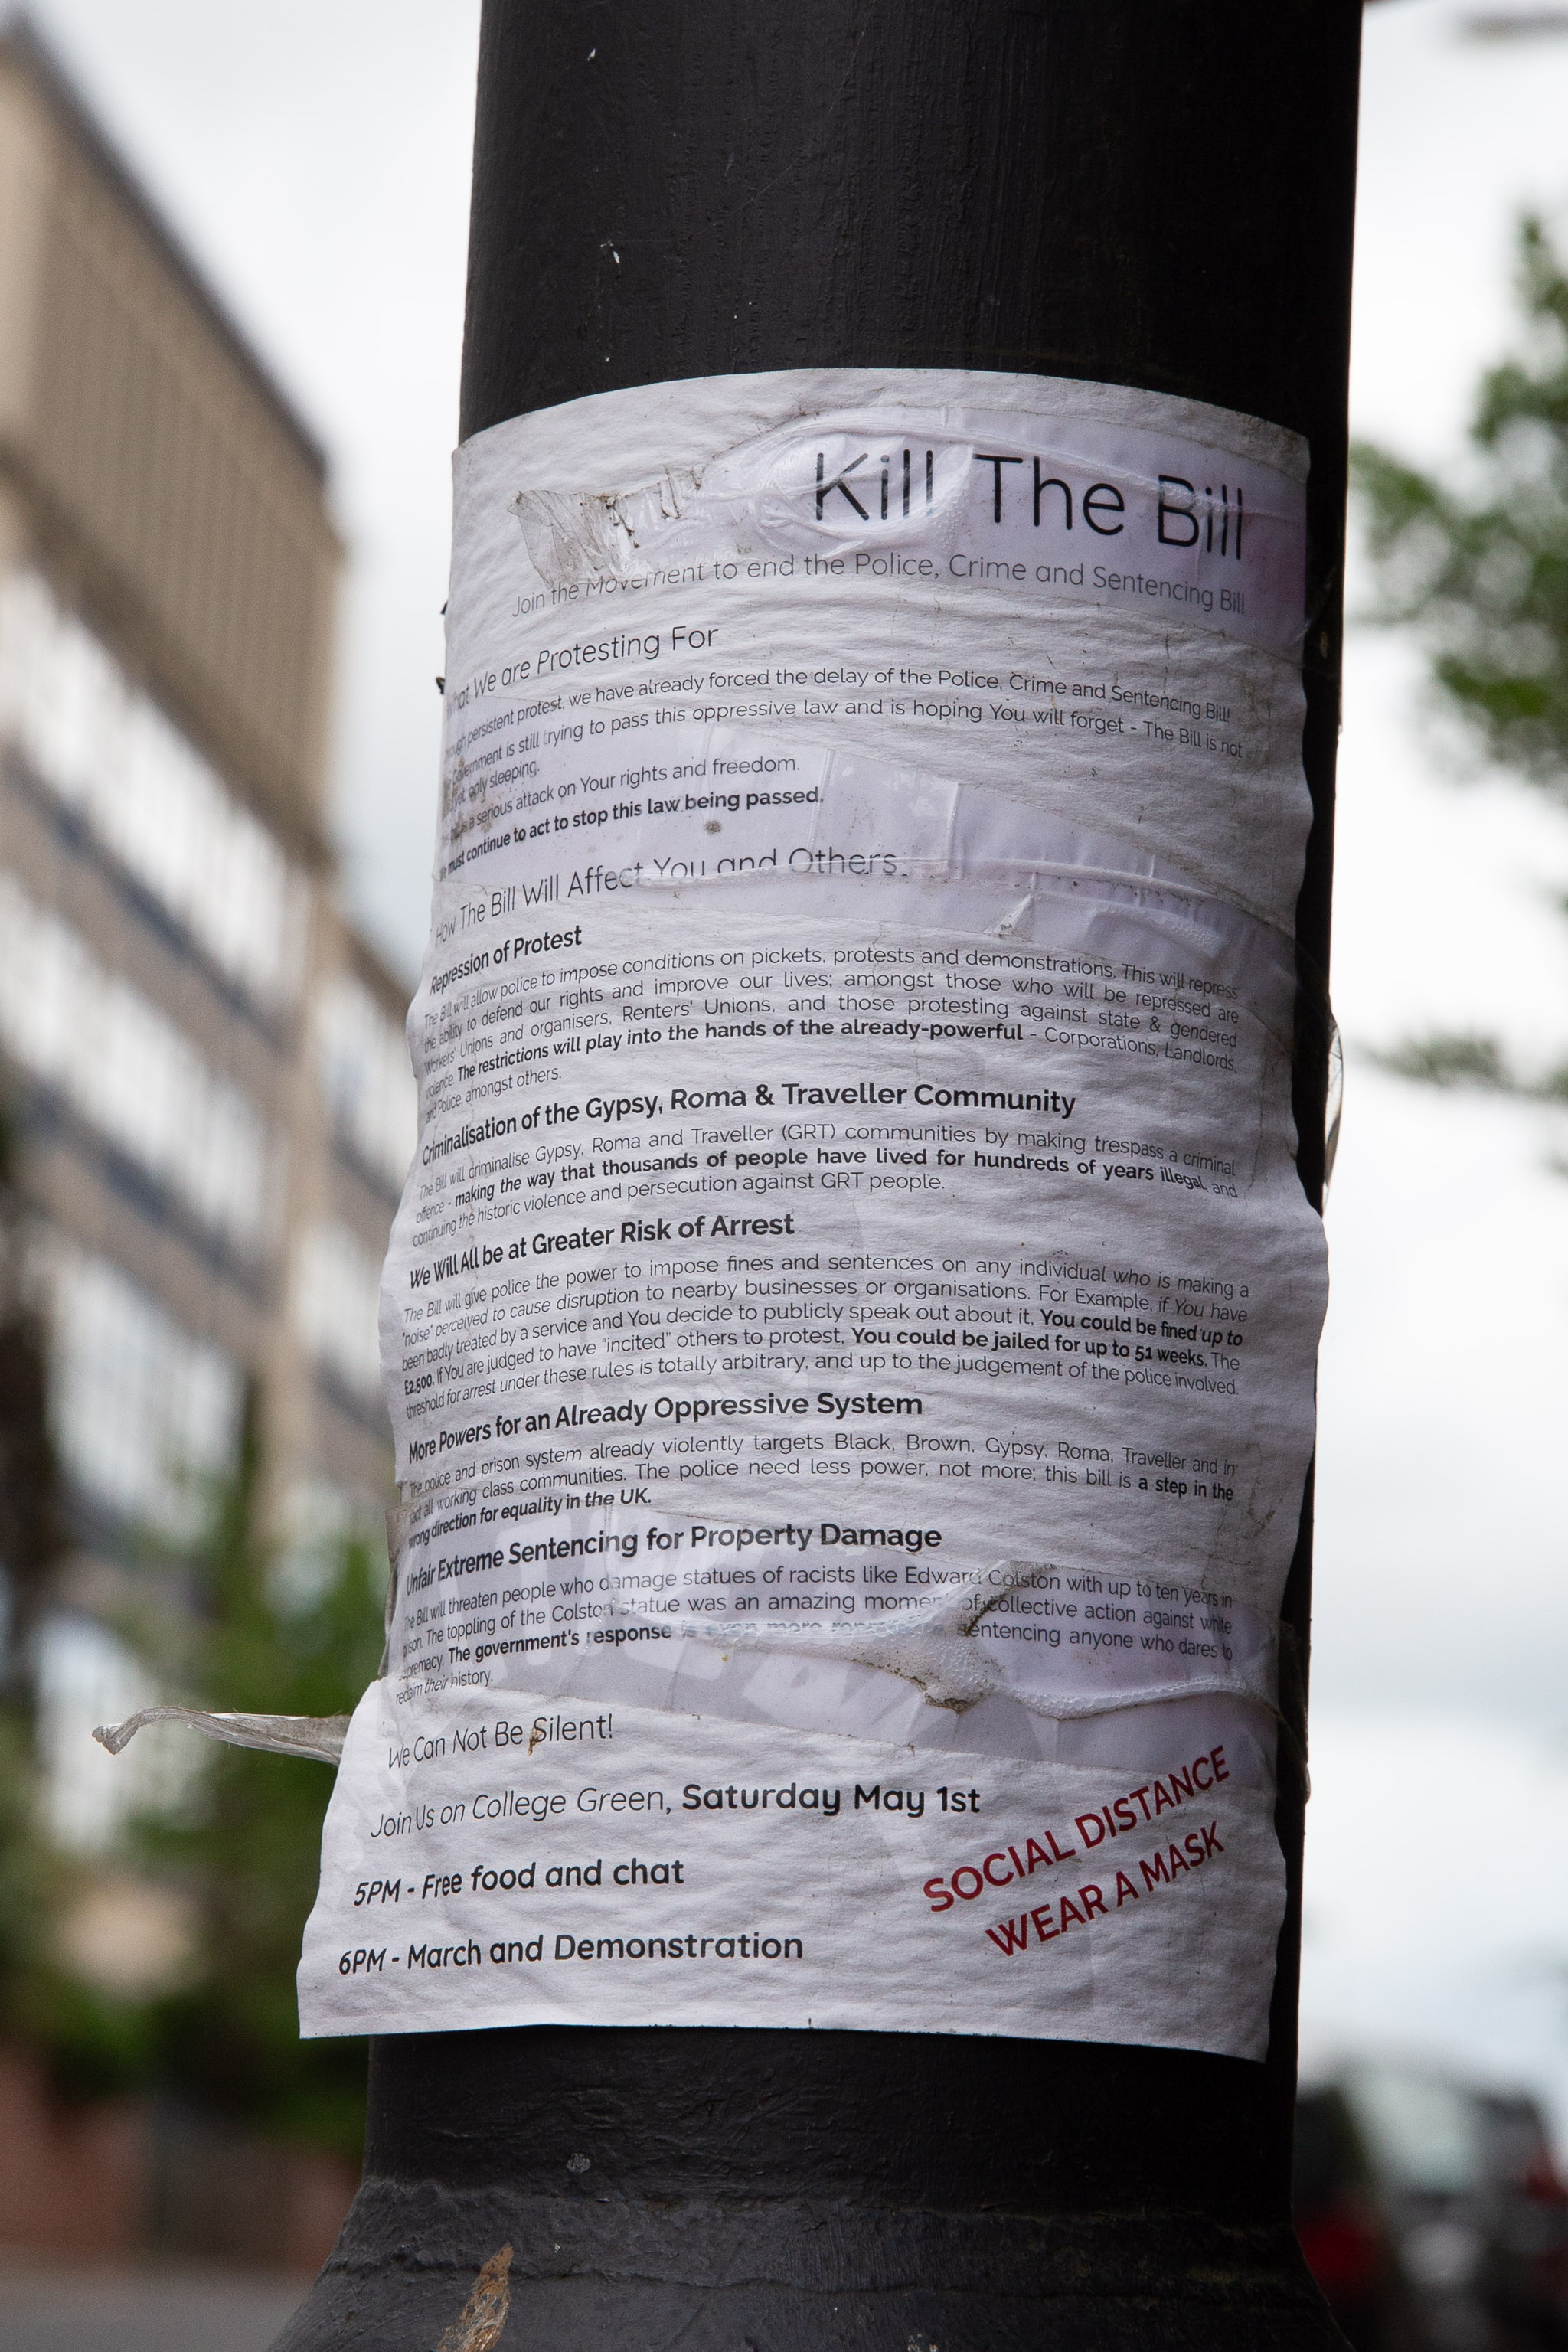 Kill The Bill
...and on the same lamppost, some Kill The Bill literature. That's me: bringing you the social history that Google Street View can't.
